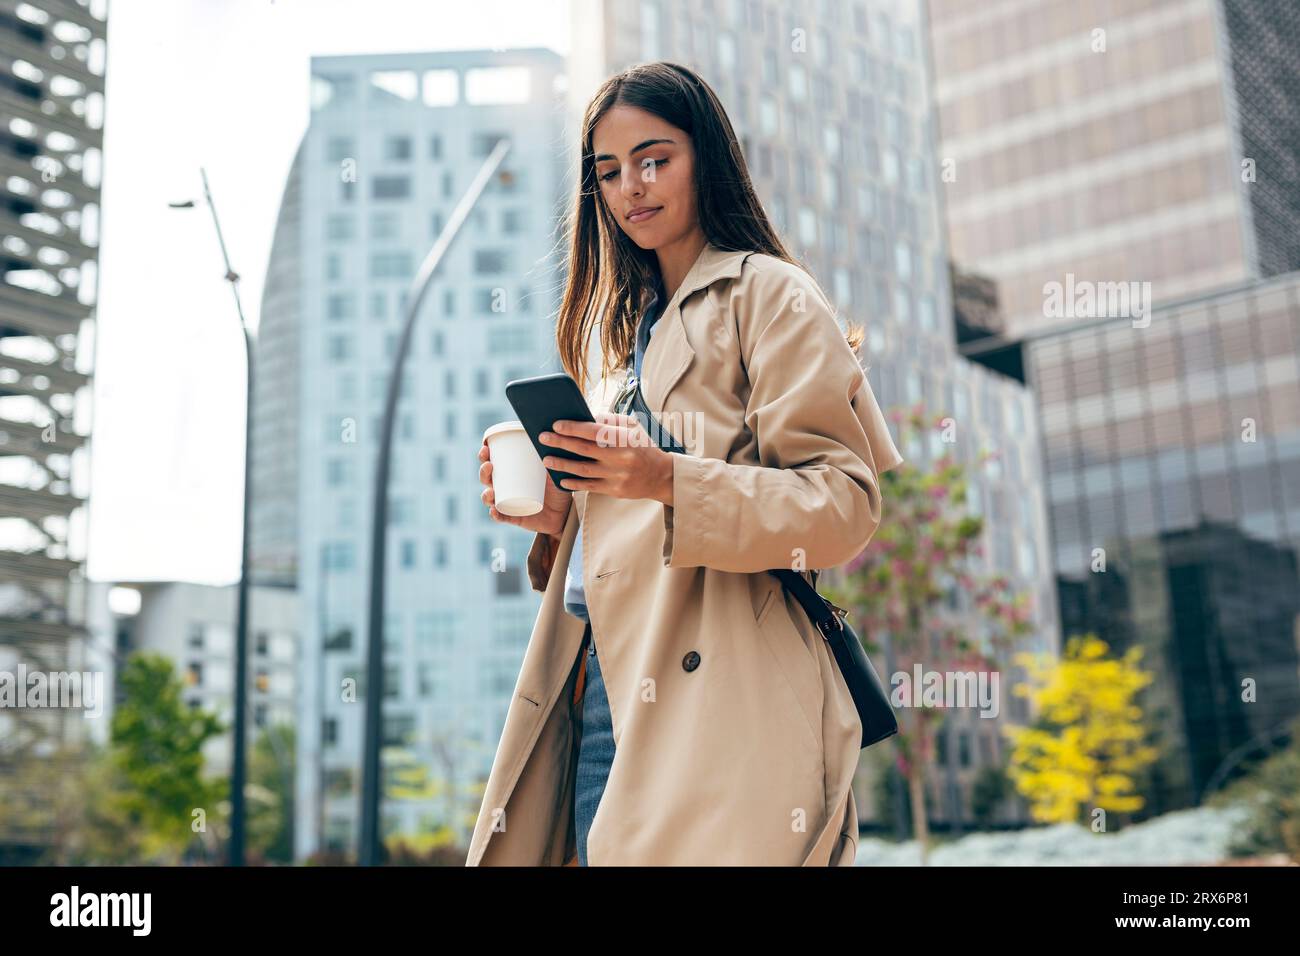 Young woman using mobile phone in city Stock Photo